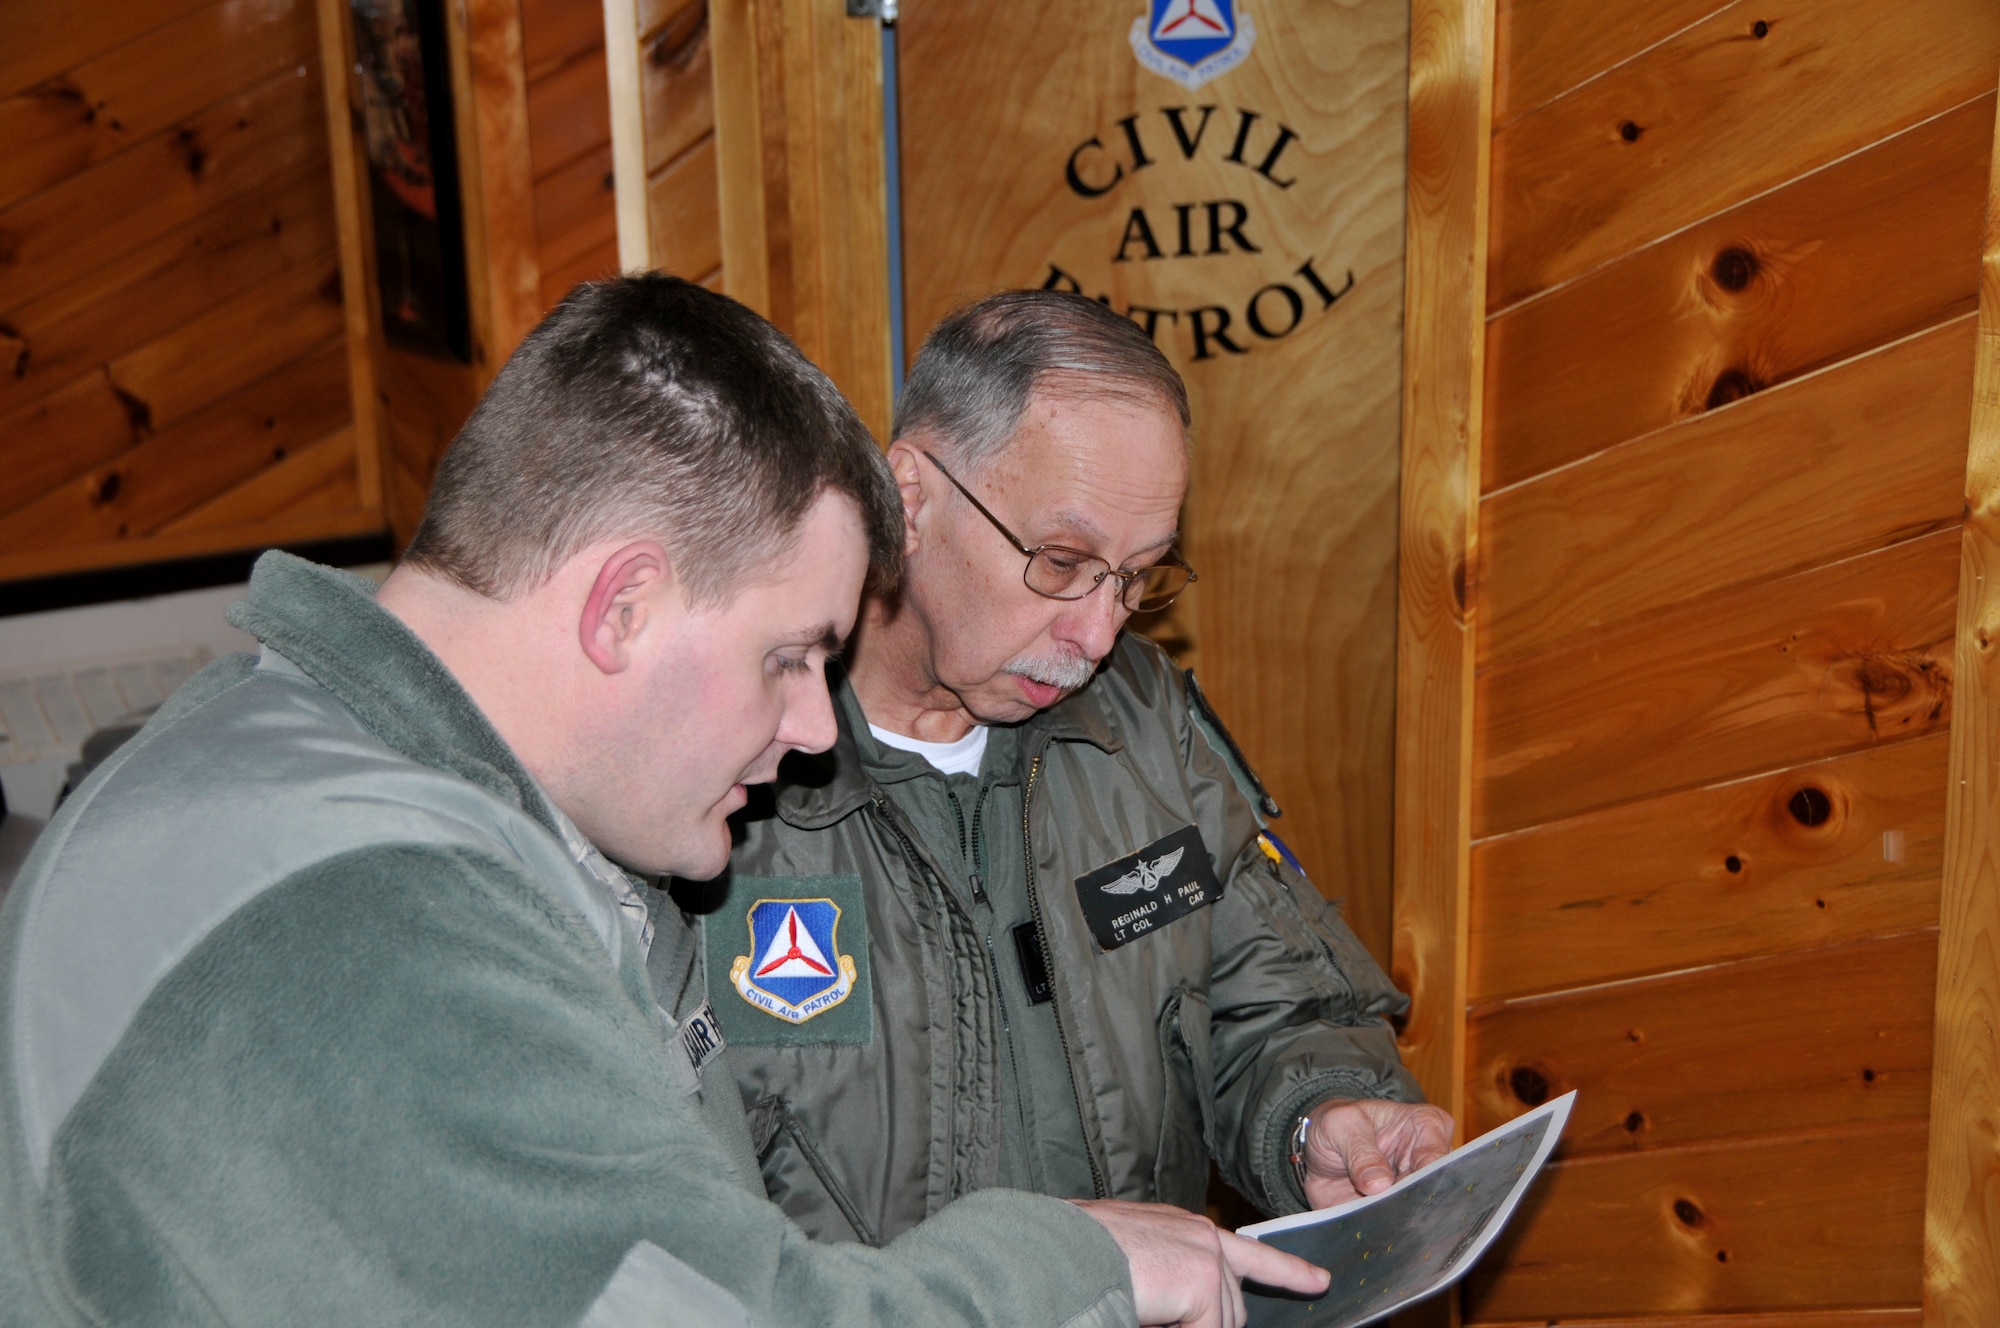 U.S. Air Force Master Sgt. Eric Moore 113th Weather Flight, 181st Intelligence Wing, Indiana Air National Guard briefs Lt. Col. Reginald H. Paul, Civil Air Patrol pilot, on the weather conditions in central Indiana prior to the Operation Blue Sky sortie Feb. 21, 2014. The 181st IW deployed an Aerial Collections Team to conduct aerial assessment of flooding in Tippecanoe and Fulton Counties in order to provide Indiana Department of Homeland Security with an accurate assessment of flooding.  The 181st Intelligence Wing is crucial to State domestic response. (U.S. Air National Guard photo by Senior Master Sgt. John S. Chapman/Released)